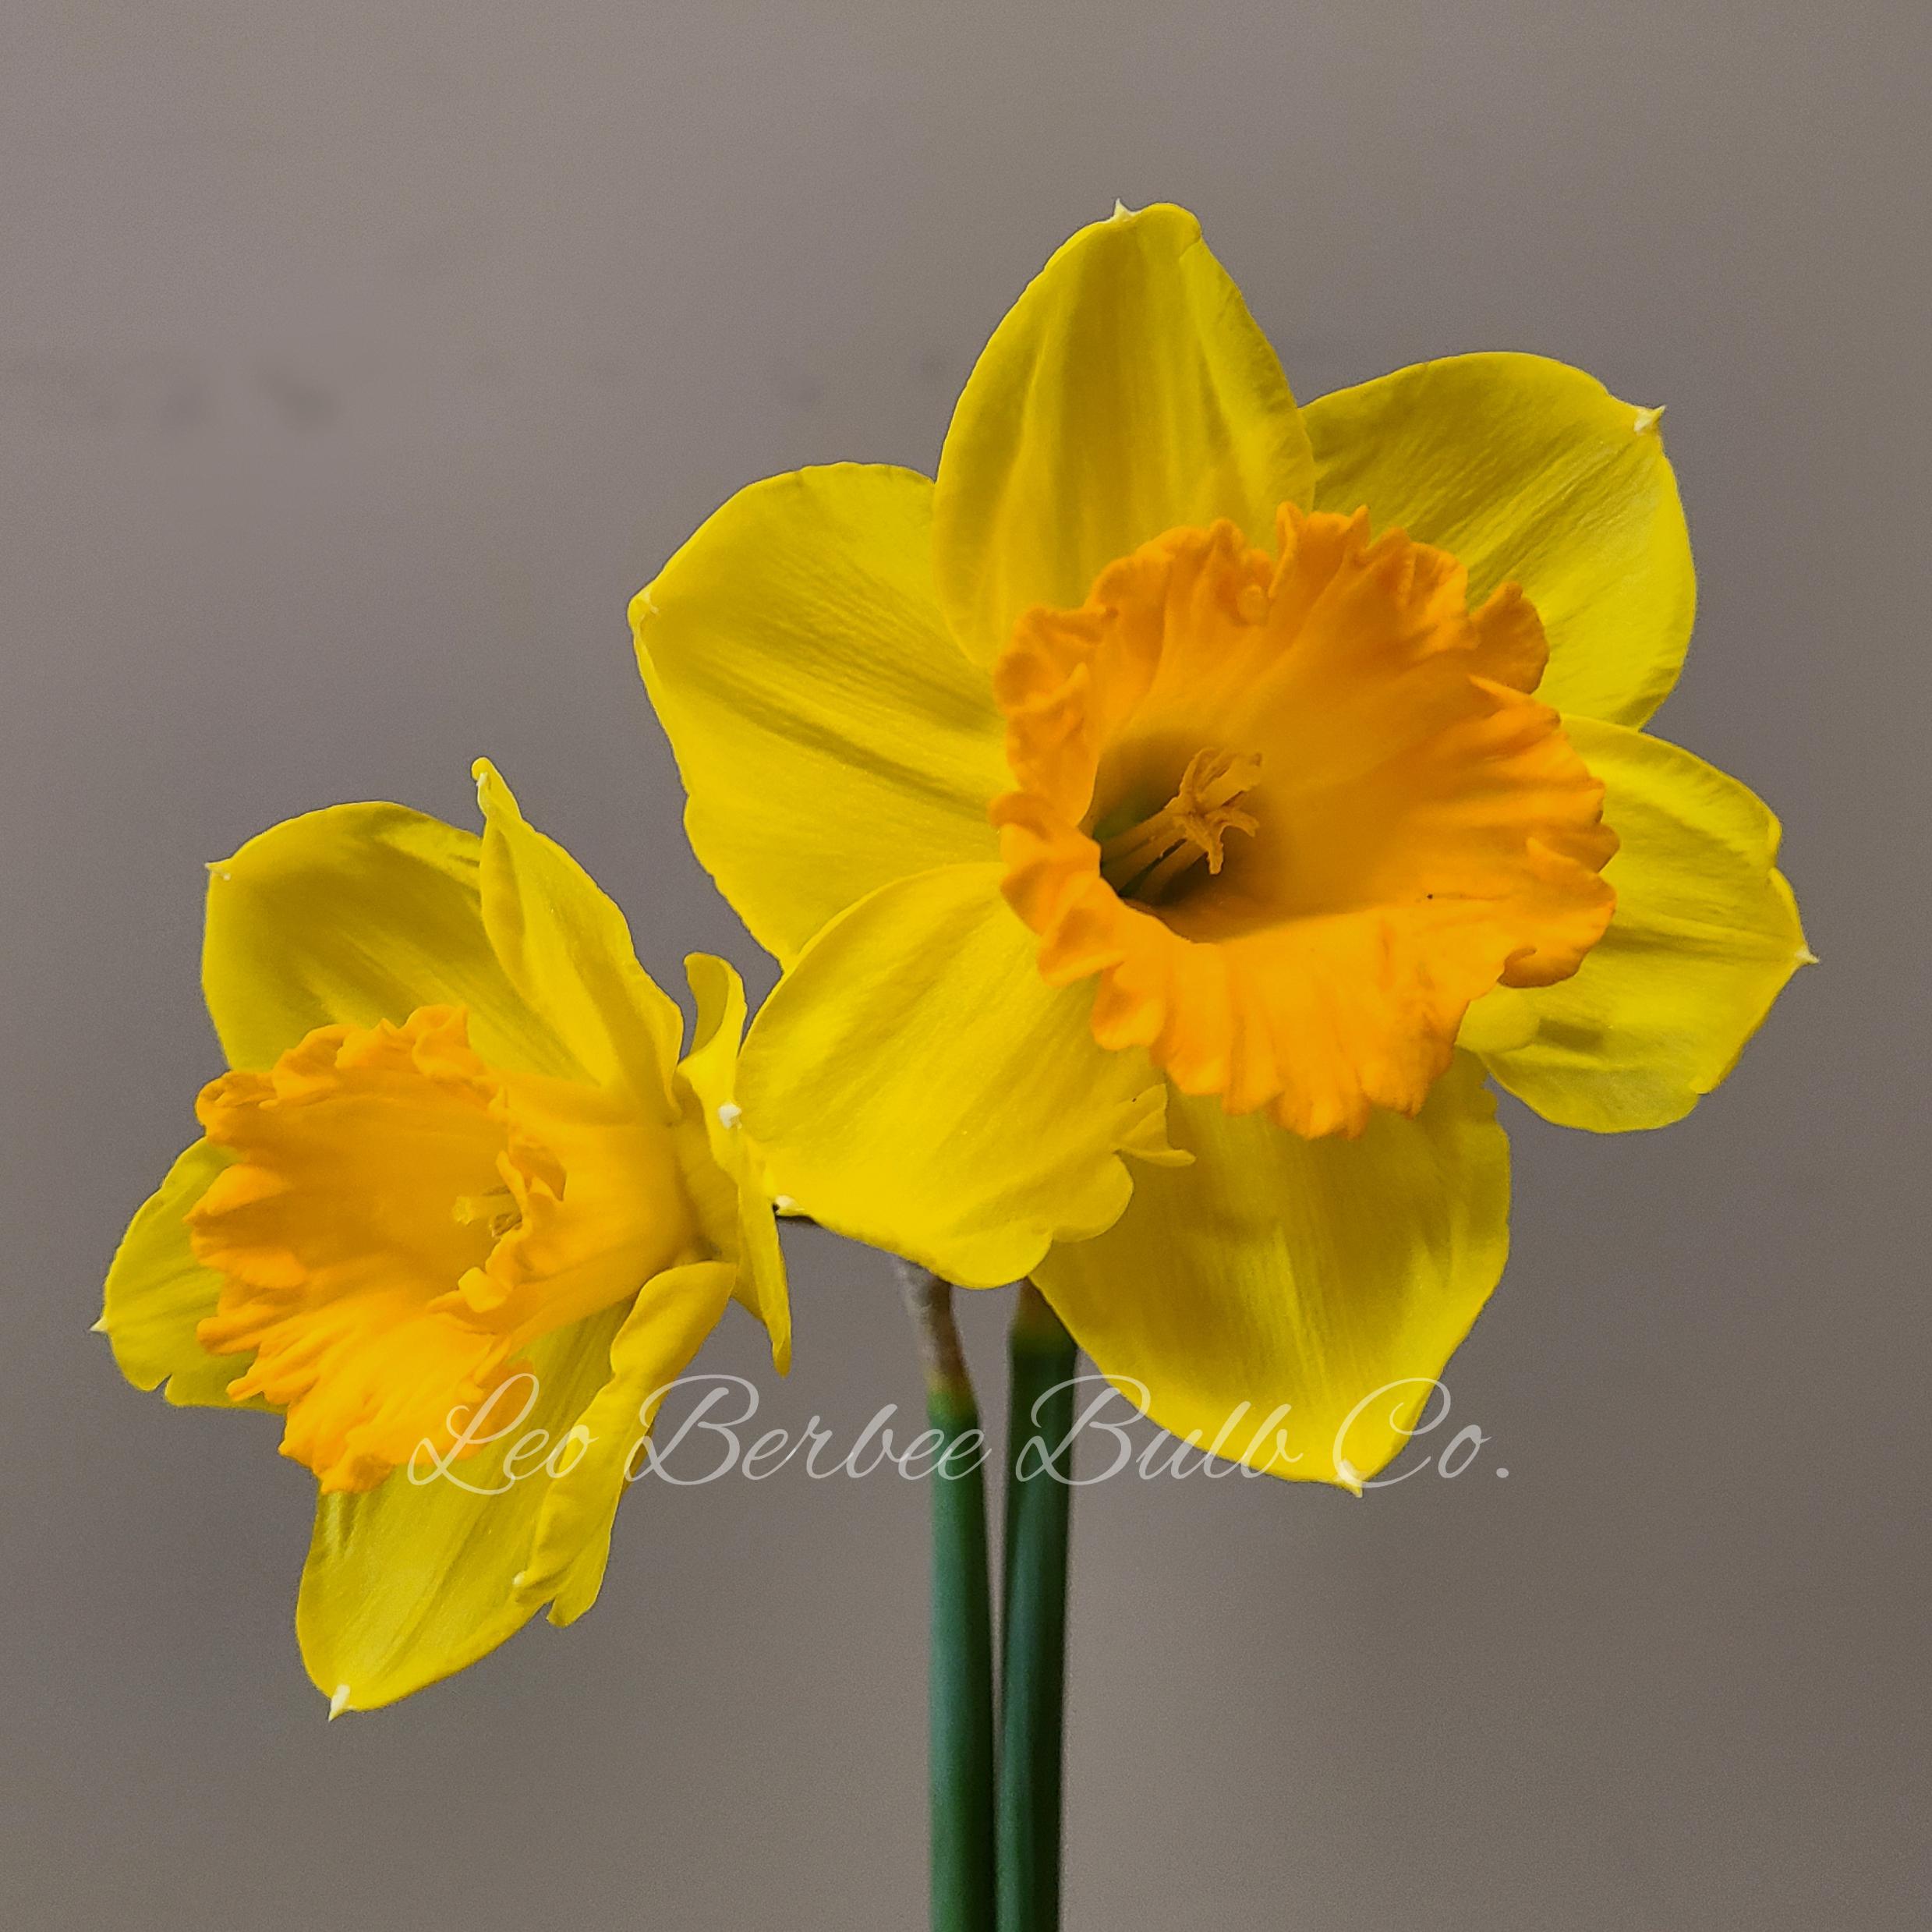 Daffodil Large Cupped 'Fortune' - from Leo Berbee Bulb Company